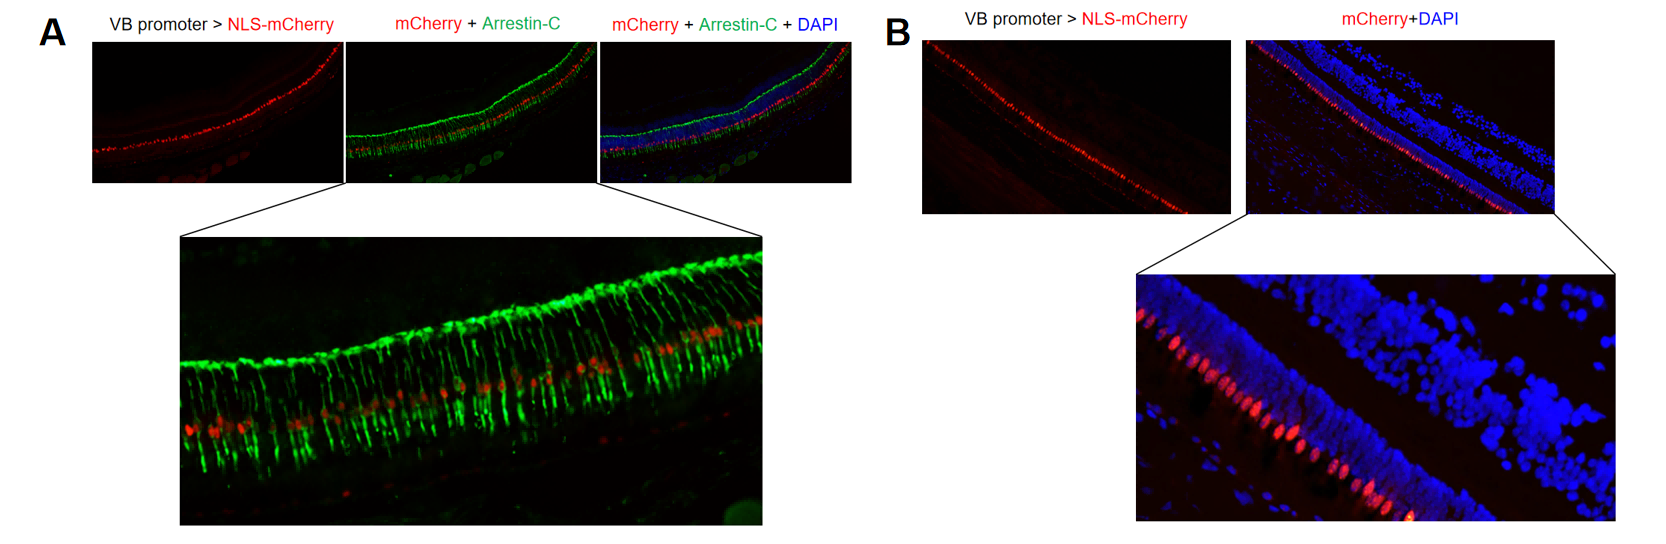 Functional characterization of a novel VB promoter identified from screening.png